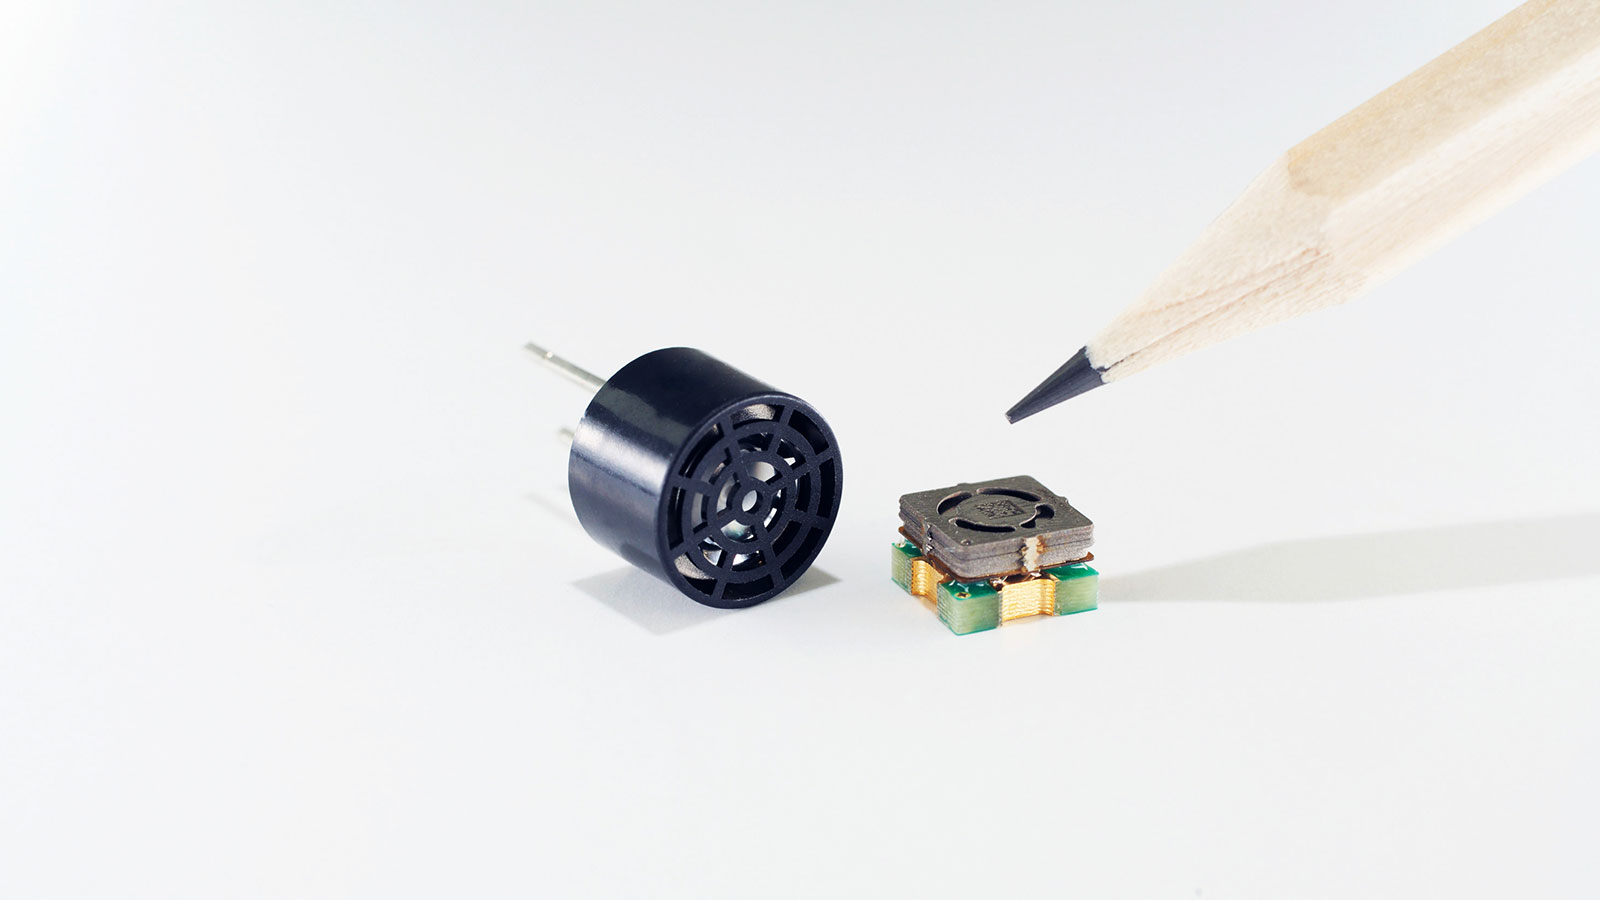 Smaller transducers for future haptic technology